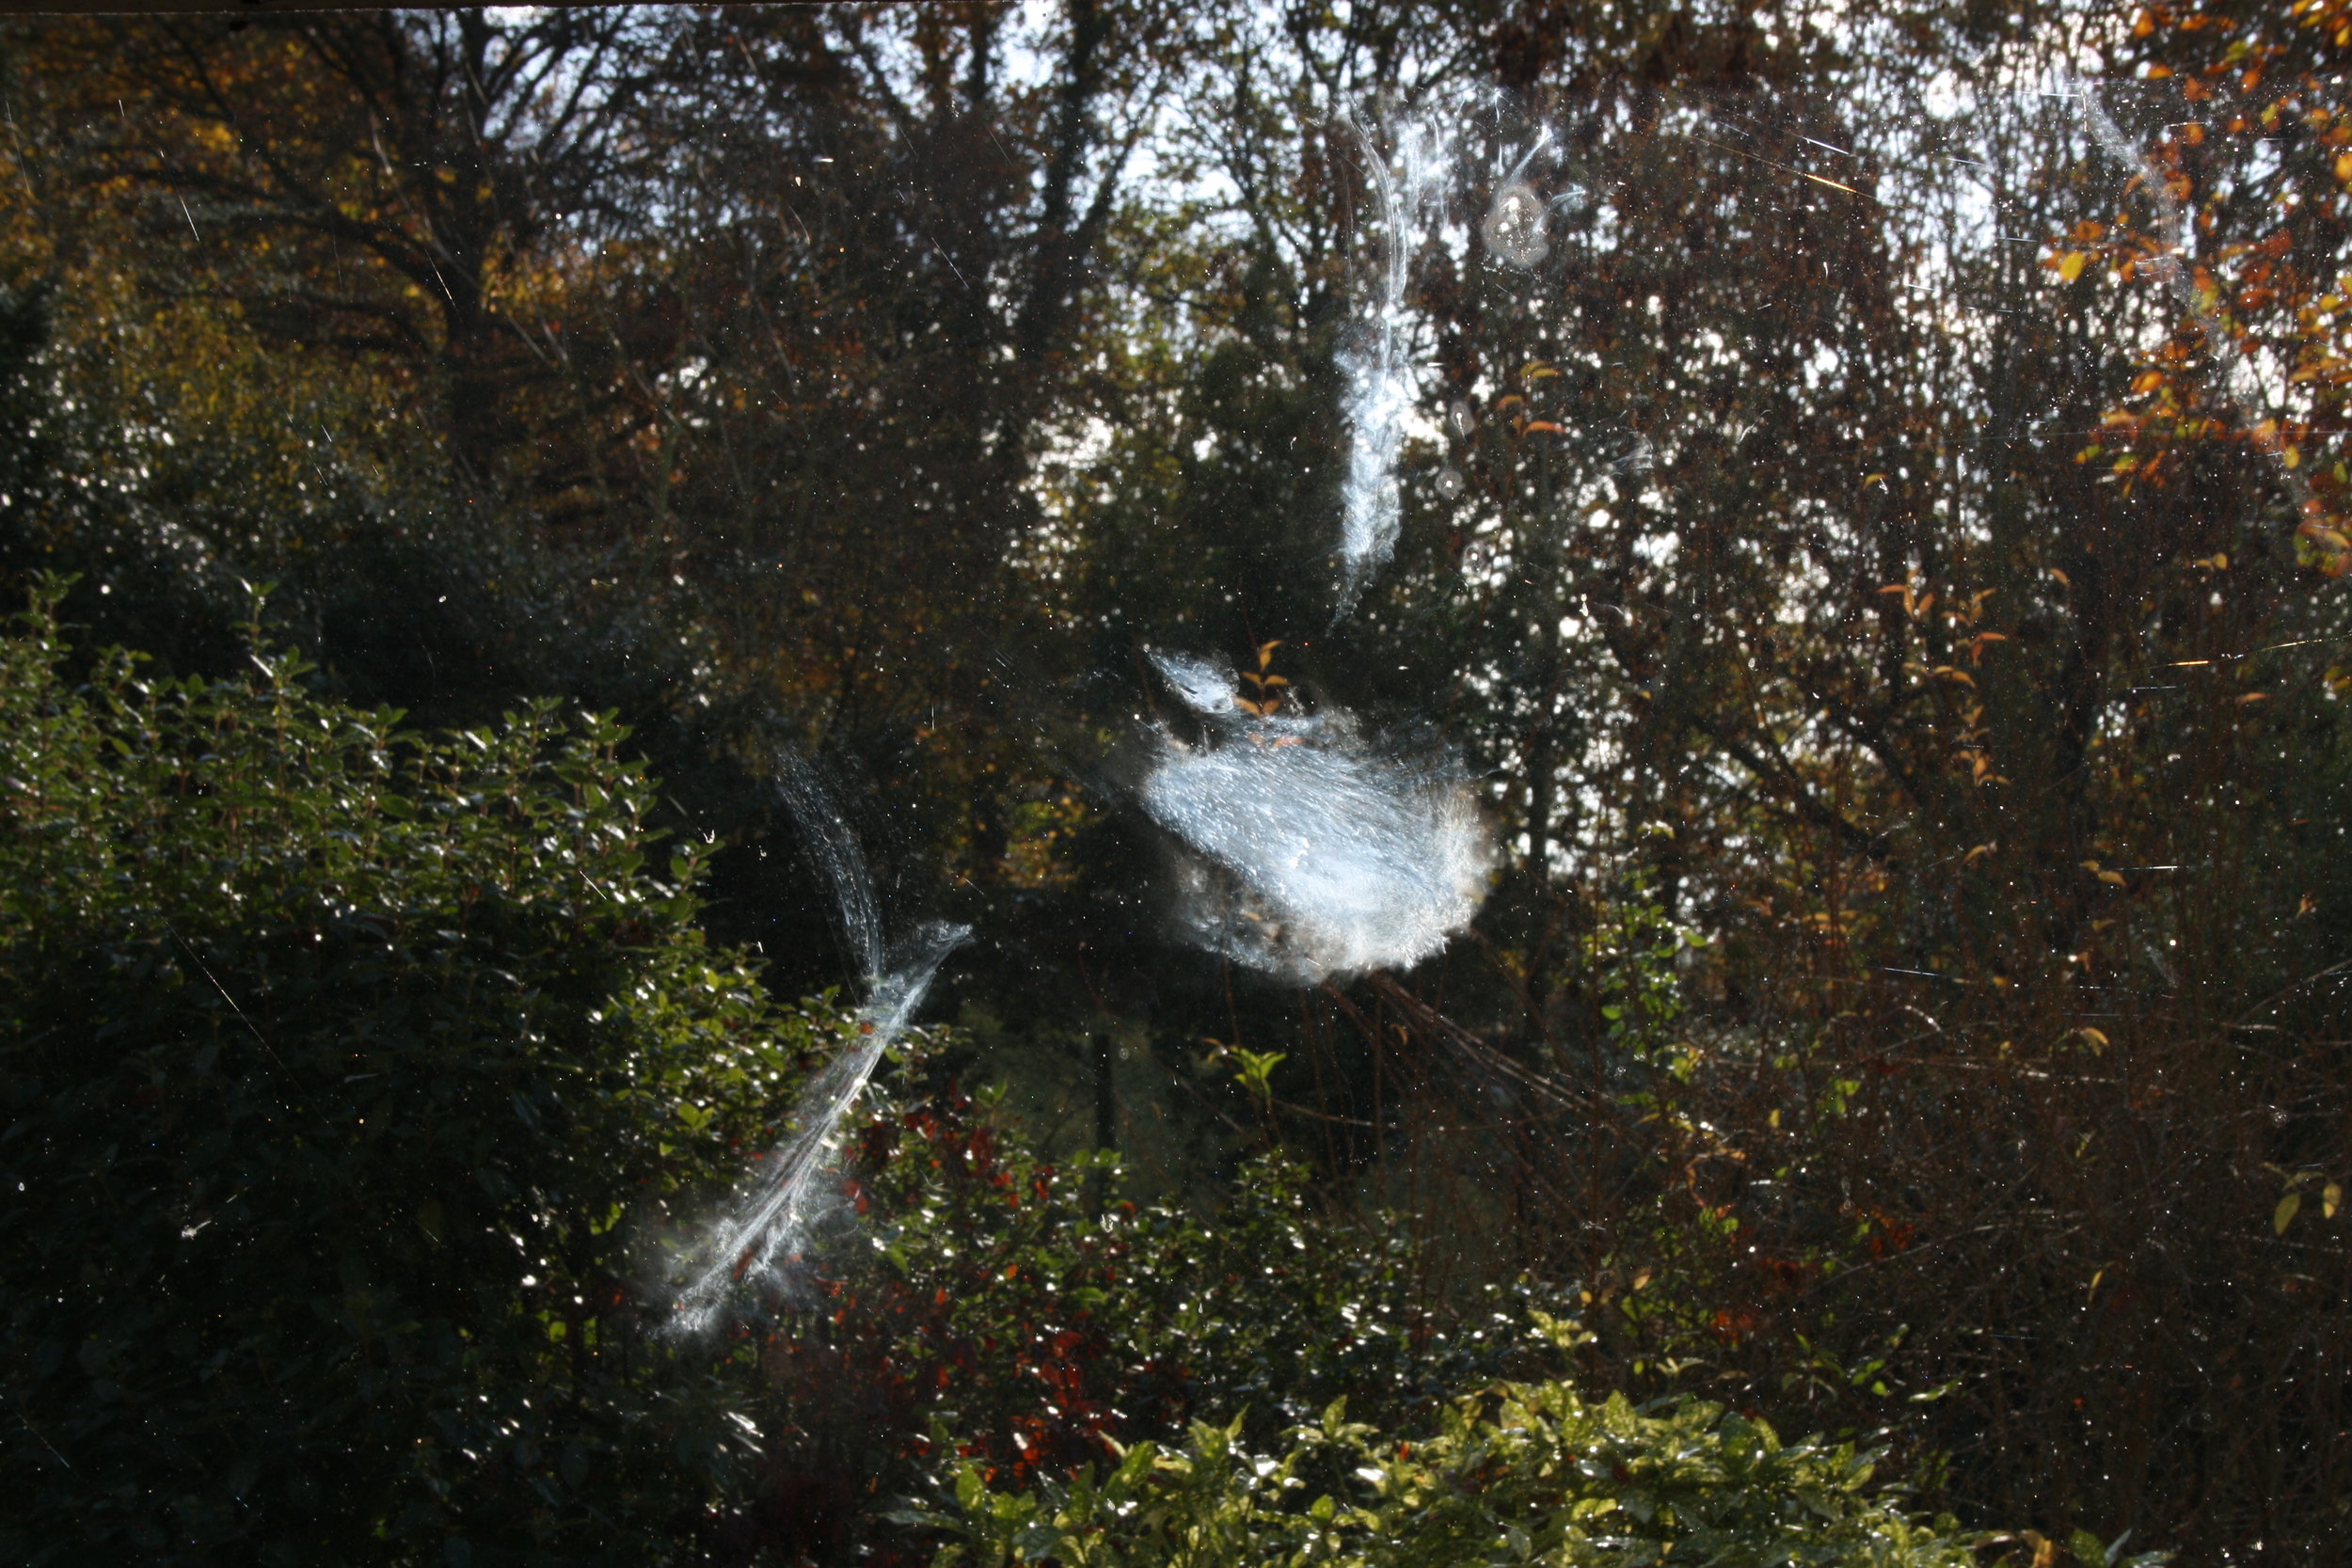 Smudge left on a window after a bird collision by Lionel Allorge.